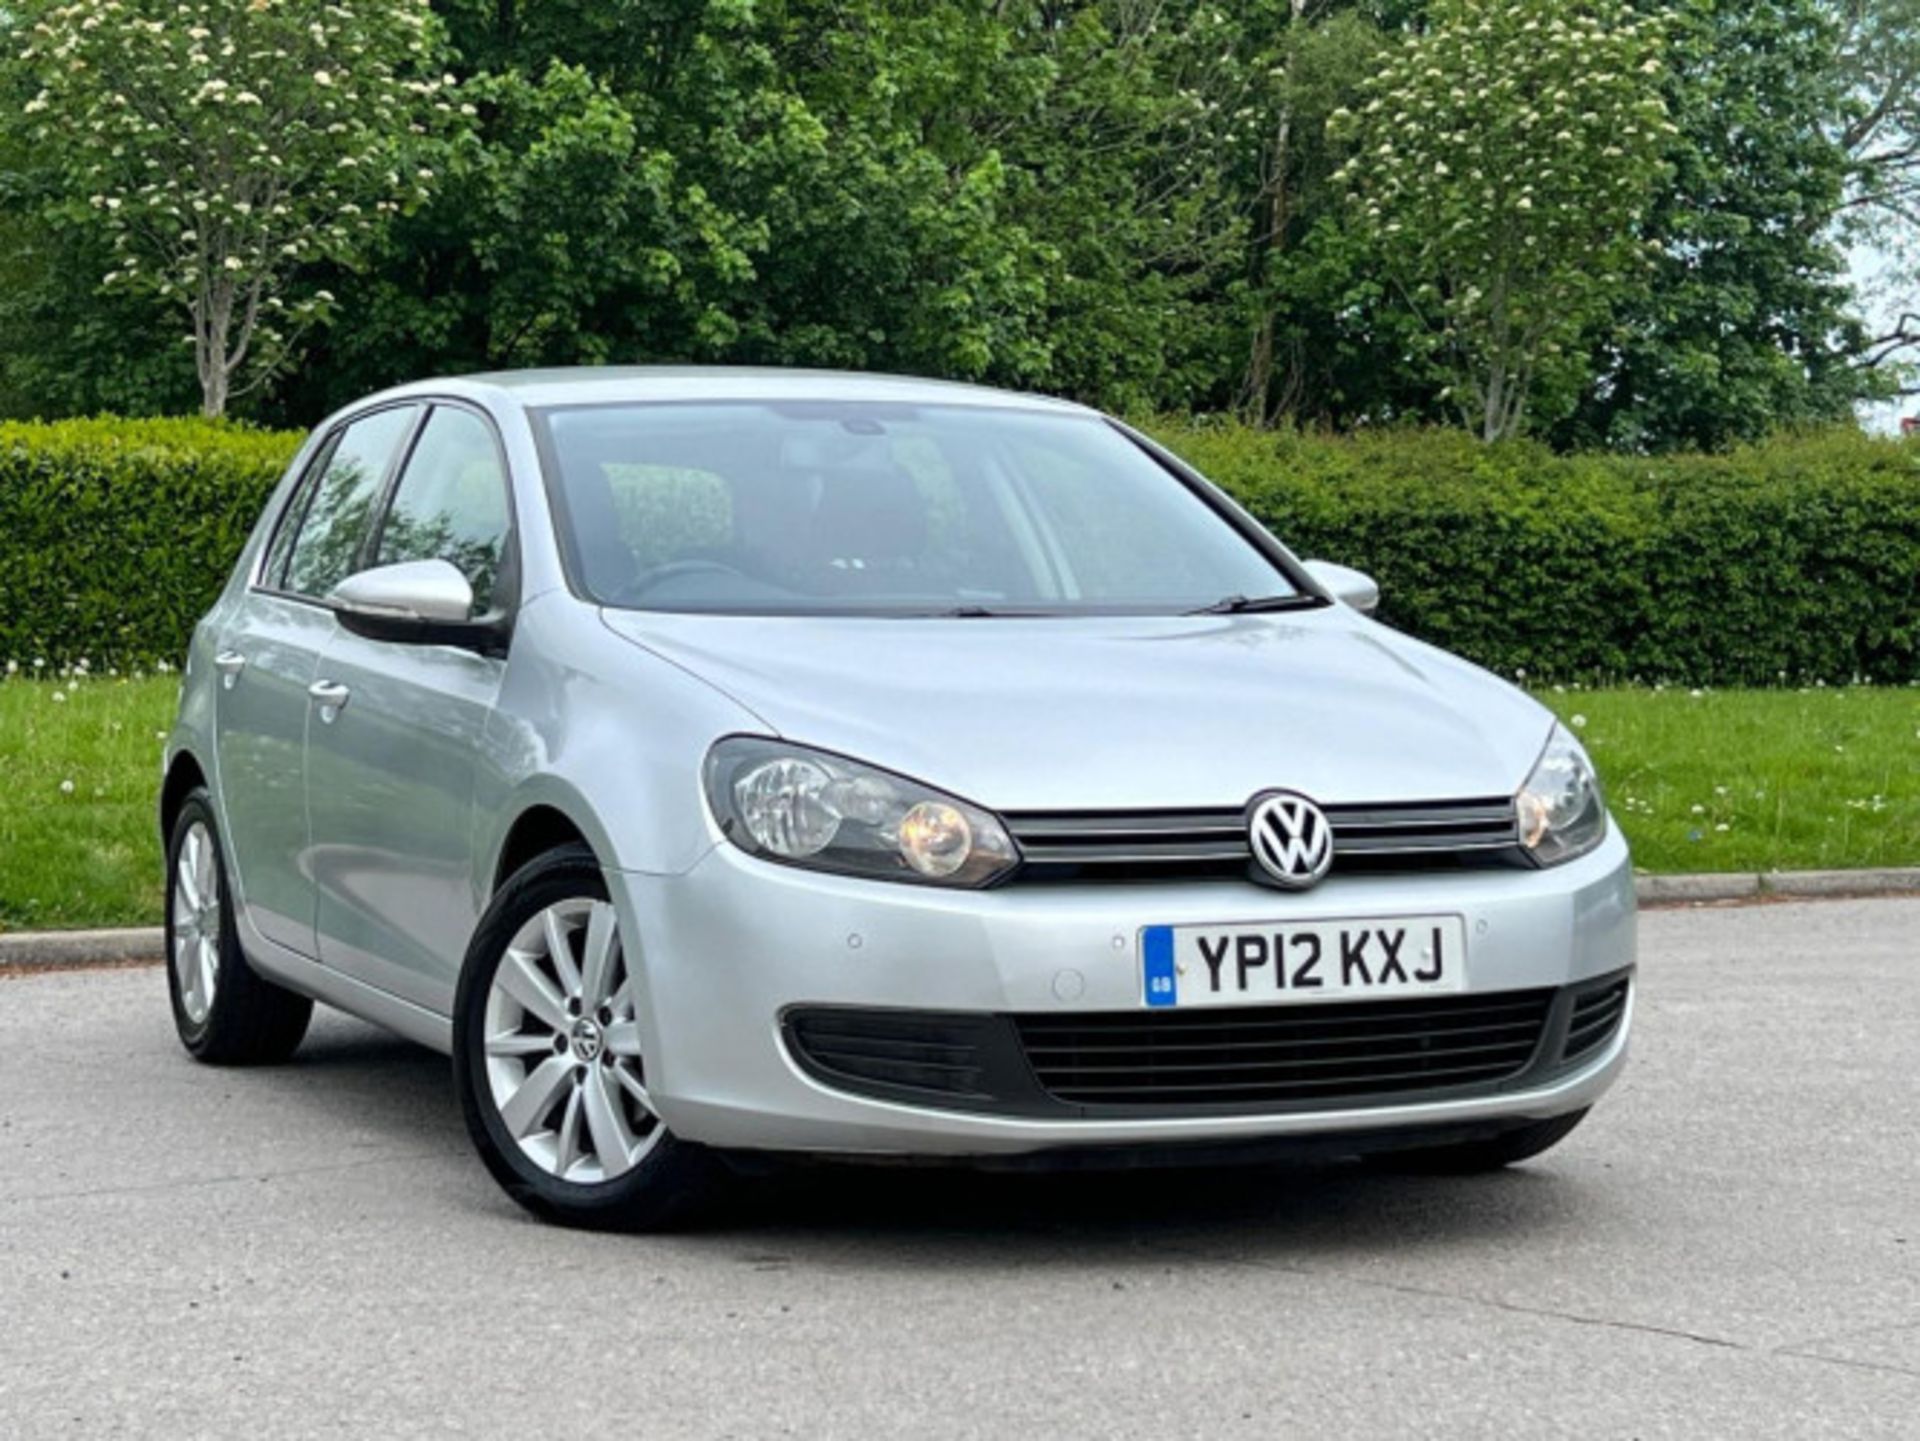 IMPECCABLE 2012 VOLKSWAGEN GOLF 1.6 TDI MATCH >>--NO VAT ON HAMMER--<< - Image 3 of 116